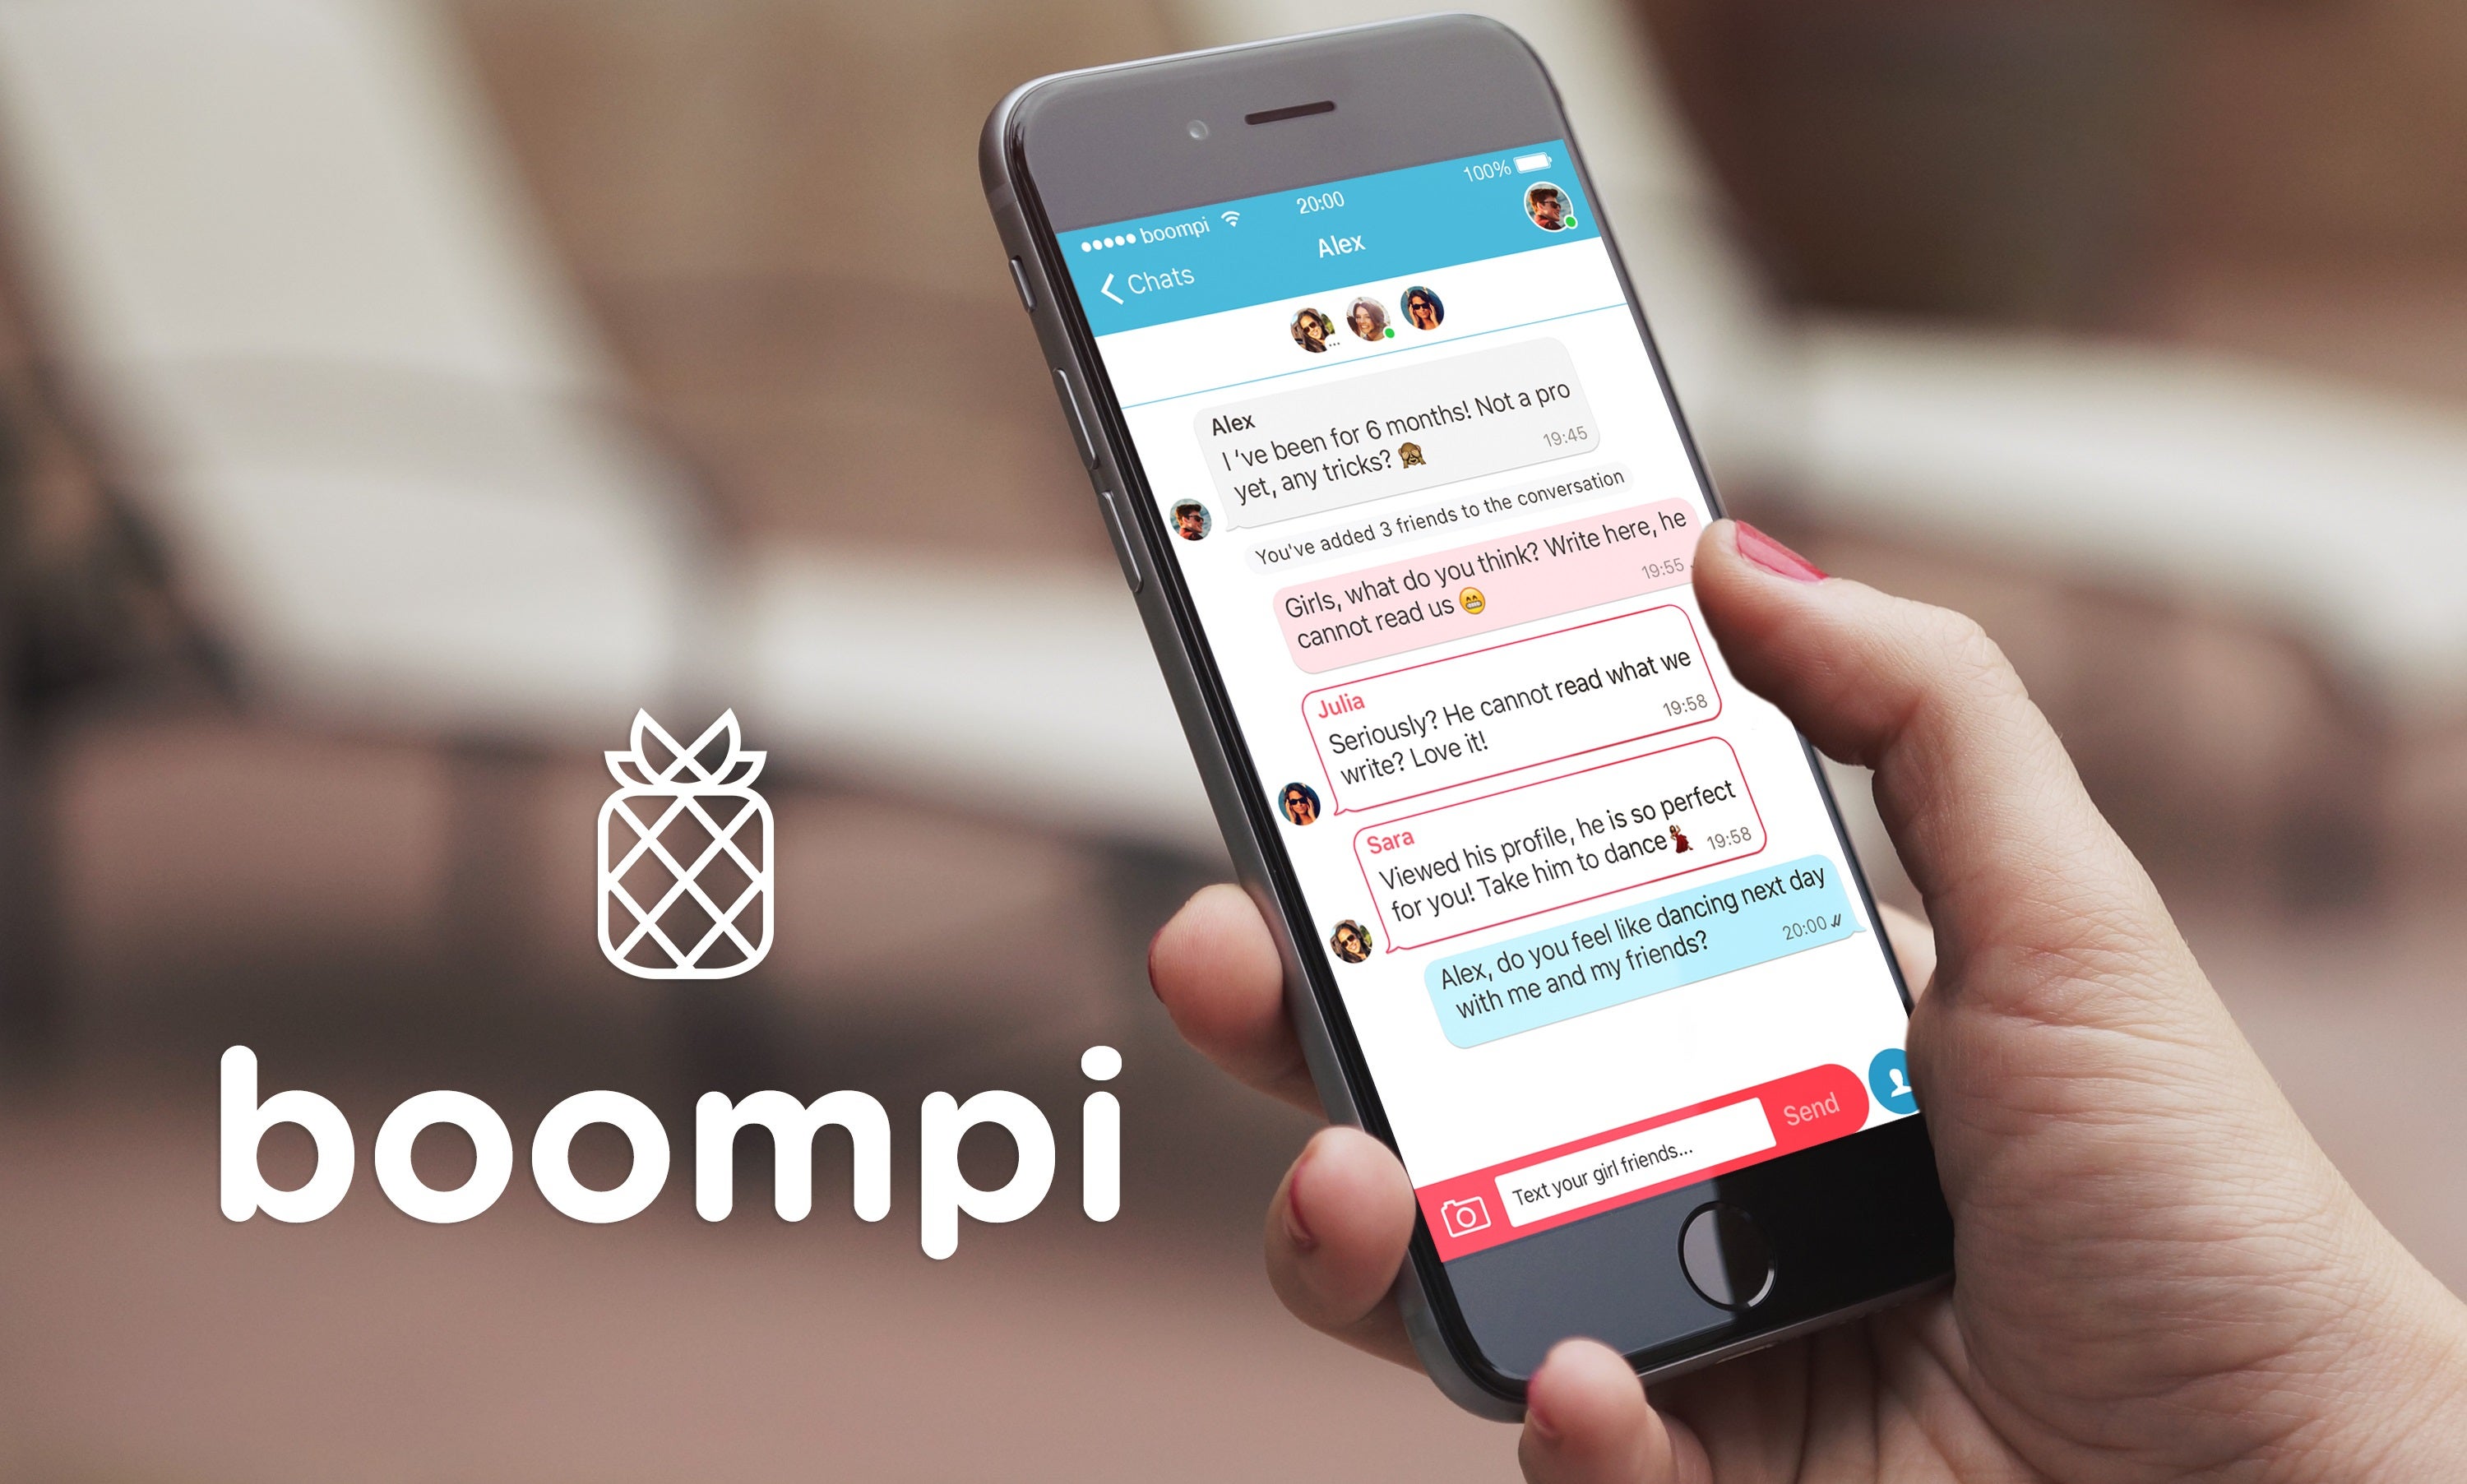 Boompi is the dating app that lets girls invite their girl friends to spy on convos with boys